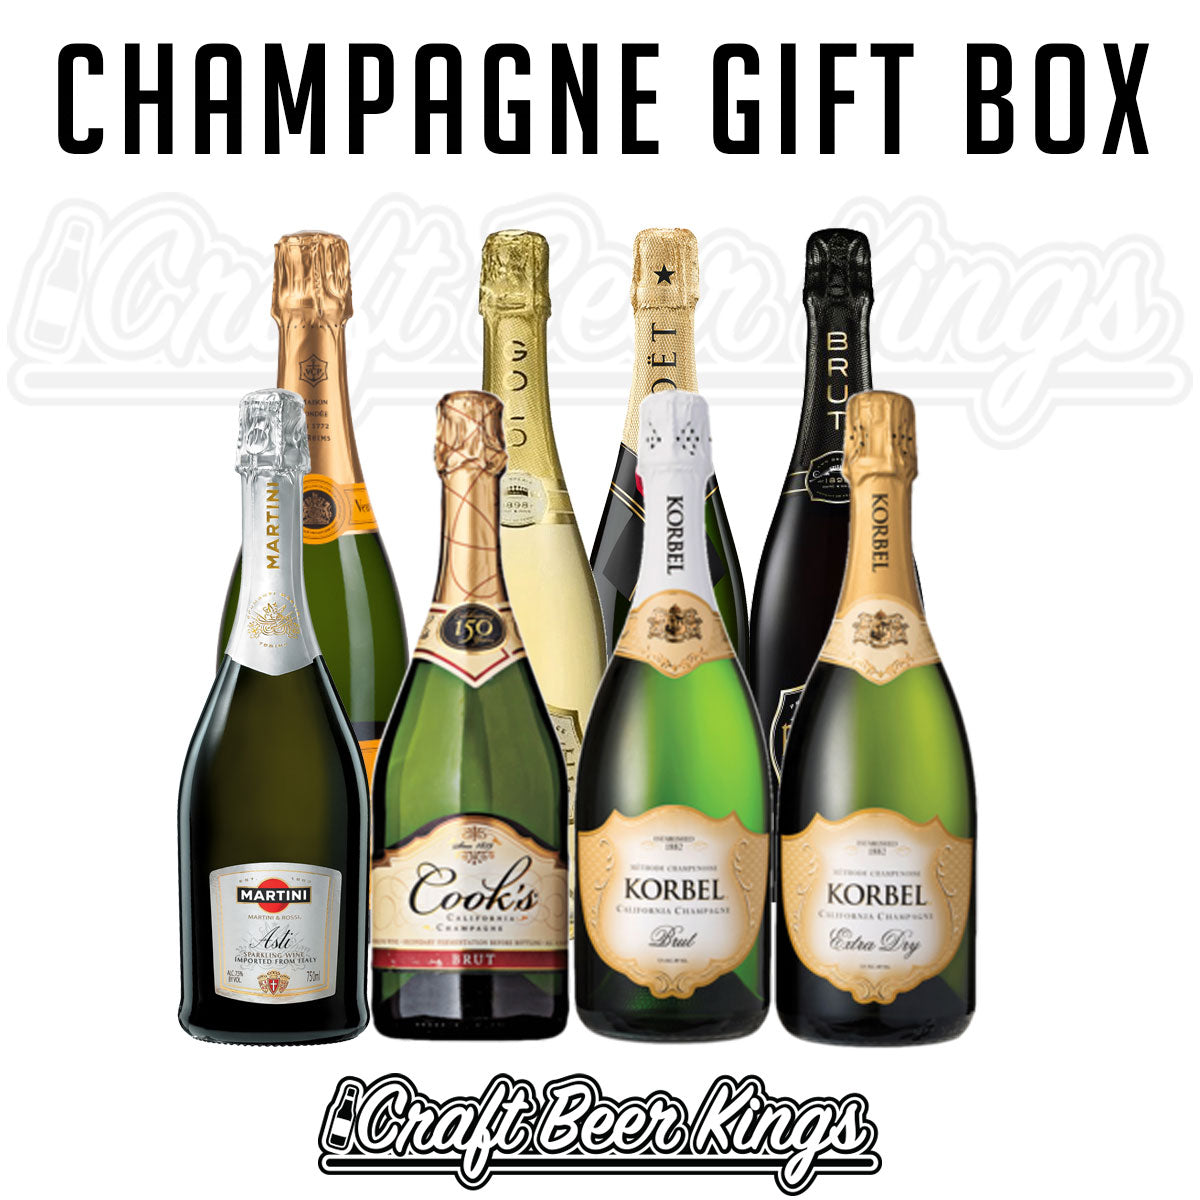 Champagne Gift Box - Shipping Included!